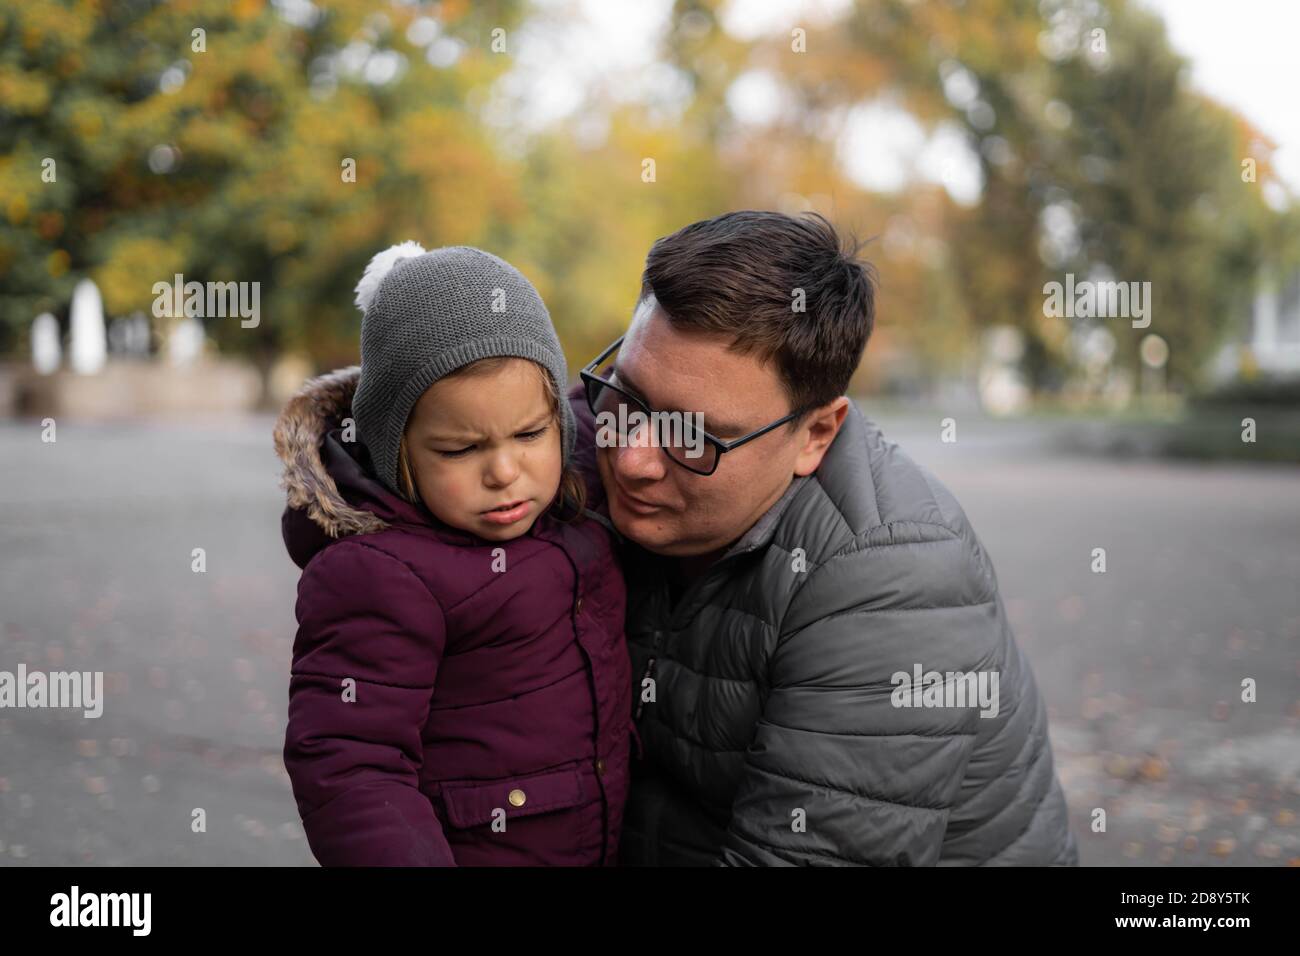 Father comforting toddler child, parent support. Autumn, yellow leaves. Outdoors kids activity Stock Photo